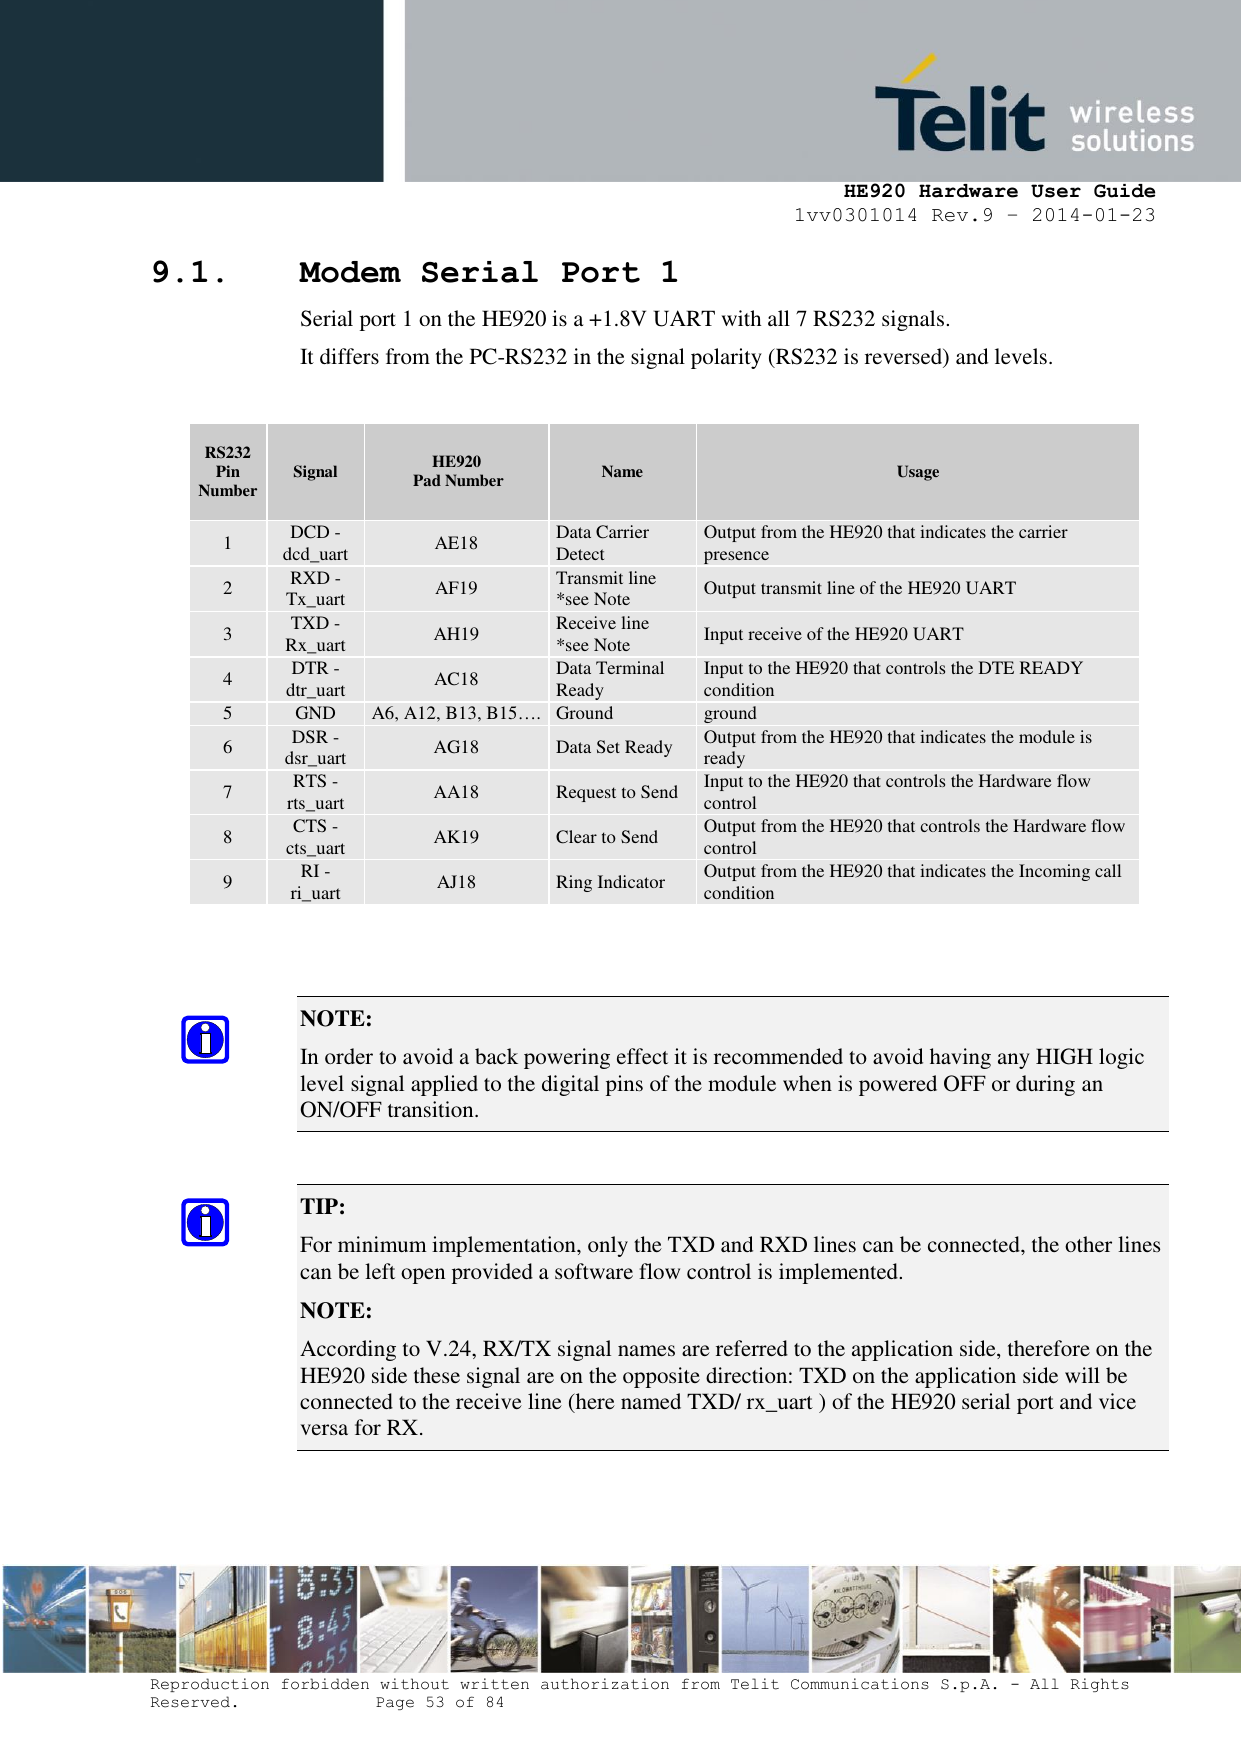     HE920 Hardware User Guide 1vv0301014 Rev.9 – 2014-01-23 Reproduction forbidden without written authorization from Telit Communications S.p.A. - All Rights Reserved.    Page 53 of 84  9.1. Modem Serial Port 1 Serial port 1 on the HE920 is a +1.8V UART with all 7 RS232 signals. It differs from the PC-RS232 in the signal polarity (RS232 is reversed) and levels.  RS232 Pin Number Signal HE920  Pad Number Name Usage 1 DCD - dcd_uart AE18 Data Carrier Detect Output from the HE920 that indicates the carrier presence 2 RXD - Tx_uart AF19 Transmit line *see Note Output transmit line of the HE920 UART 3 TXD - Rx_uart AH19 Receive line  *see Note Input receive of the HE920 UART 4 DTR - dtr_uart AC18 Data Terminal Ready Input to the HE920 that controls the DTE READY condition 5 GND A6, A12, B13, B15…. Ground ground 6 DSR - dsr_uart AG18 Data Set Ready Output from the HE920 that indicates the module is ready 7 RTS -rts_uart AA18 Request to Send Input to the HE920 that controls the Hardware flow control 8 CTS - cts_uart AK19 Clear to Send Output from the HE920 that controls the Hardware flow control 9 RI - ri_uart AJ18 Ring Indicator Output from the HE920 that indicates the Incoming call condition   NOTE:  In order to avoid a back powering effect it is recommended to avoid having any HIGH logic level signal applied to the digital pins of the module when is powered OFF or during an ON/OFF transition.  TIP:  For minimum implementation, only the TXD and RXD lines can be connected, the other lines can be left open provided a software flow control is implemented. NOTE:  According to V.24, RX/TX signal names are referred to the application side, therefore on the HE920 side these signal are on the opposite direction: TXD on the application side will be connected to the receive line (here named TXD/ rx_uart ) of the HE920 serial port and vice versa for RX.  